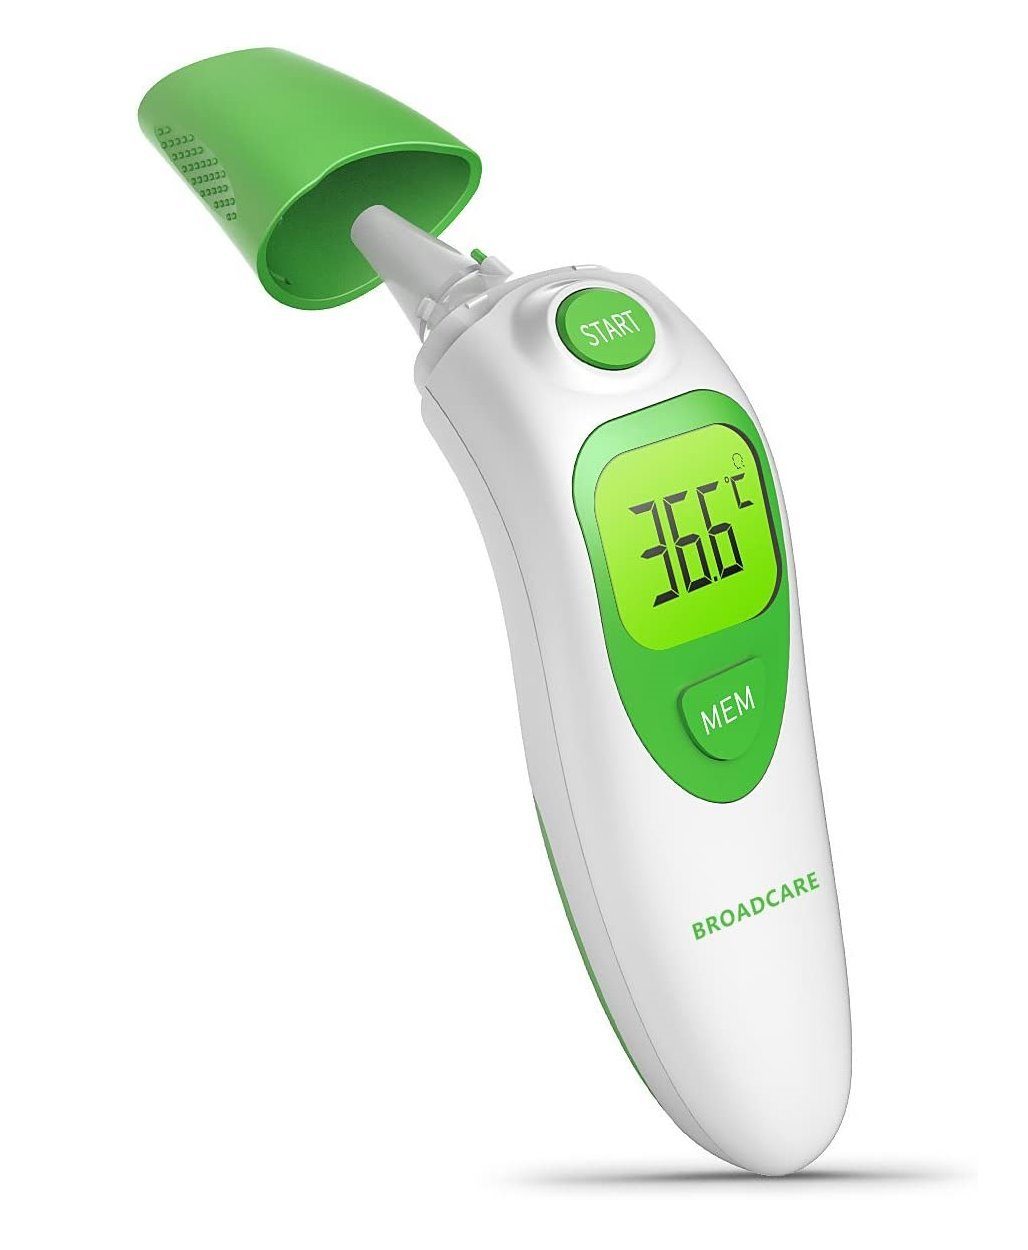 Thermometer digital Infrarot LCD Broadcare Fieberthermometer Ohr Stirnthermometer 4in1 kontaktlos Stirn Ohr-Fieberthermometer,